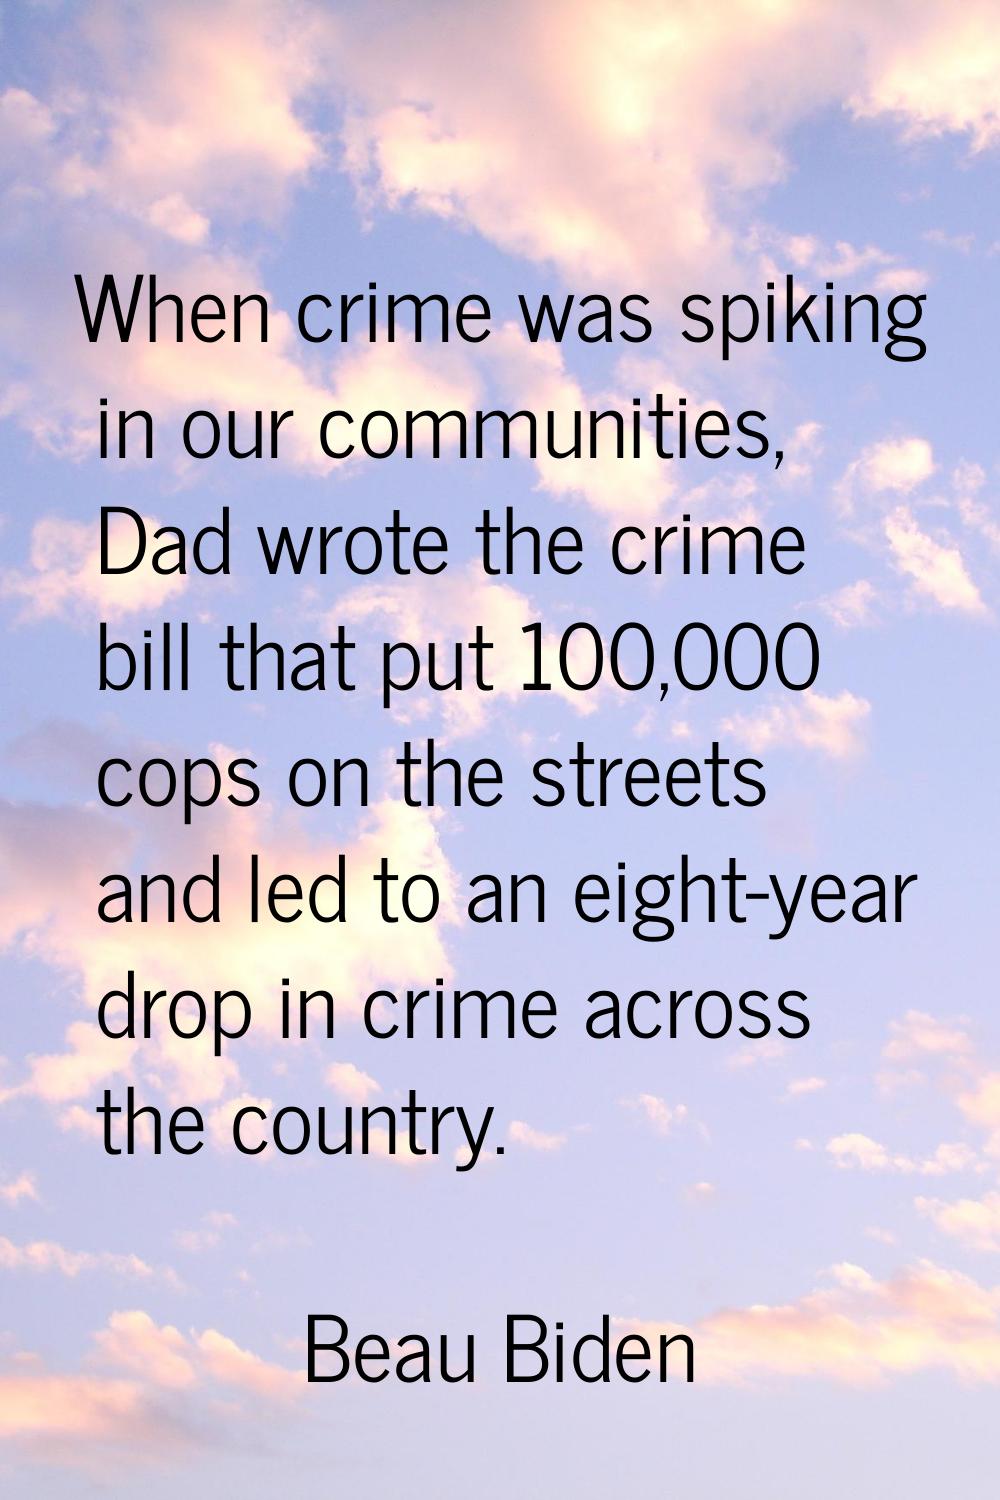 When crime was spiking in our communities, Dad wrote the crime bill that put 100,000 cops on the st